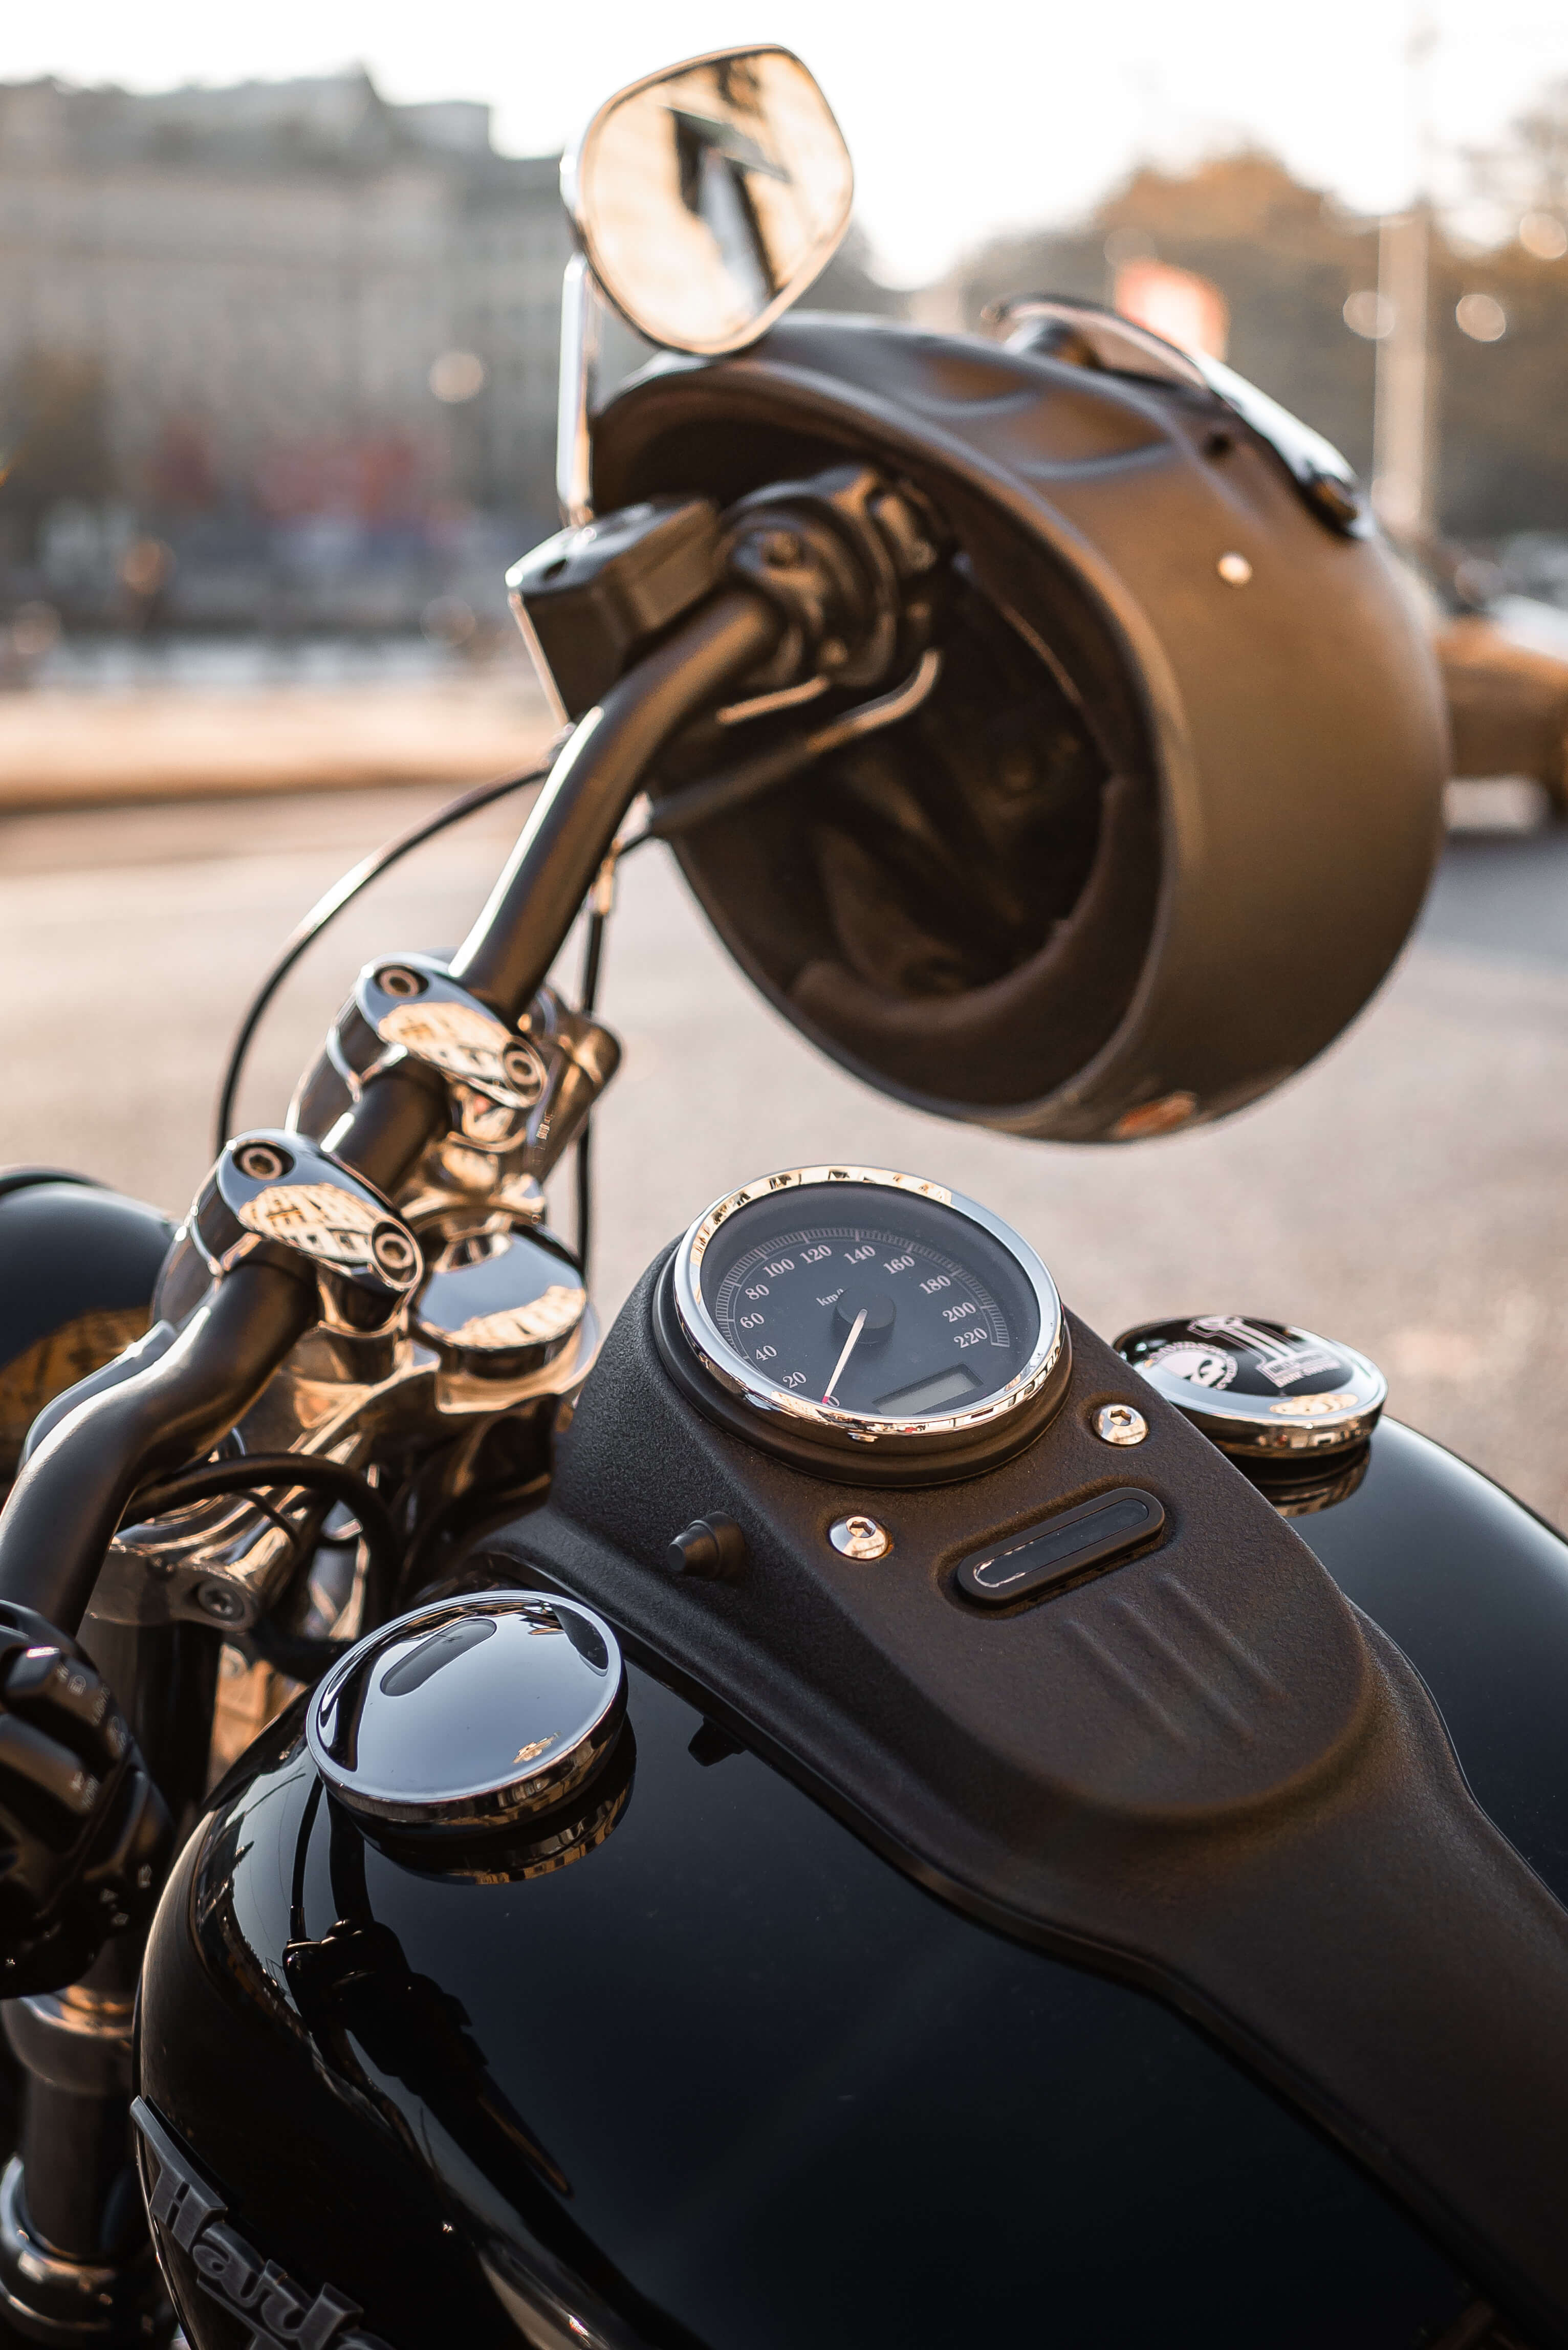 Motorcycle Helmet Bill | NW Insurance Council Insurance information and